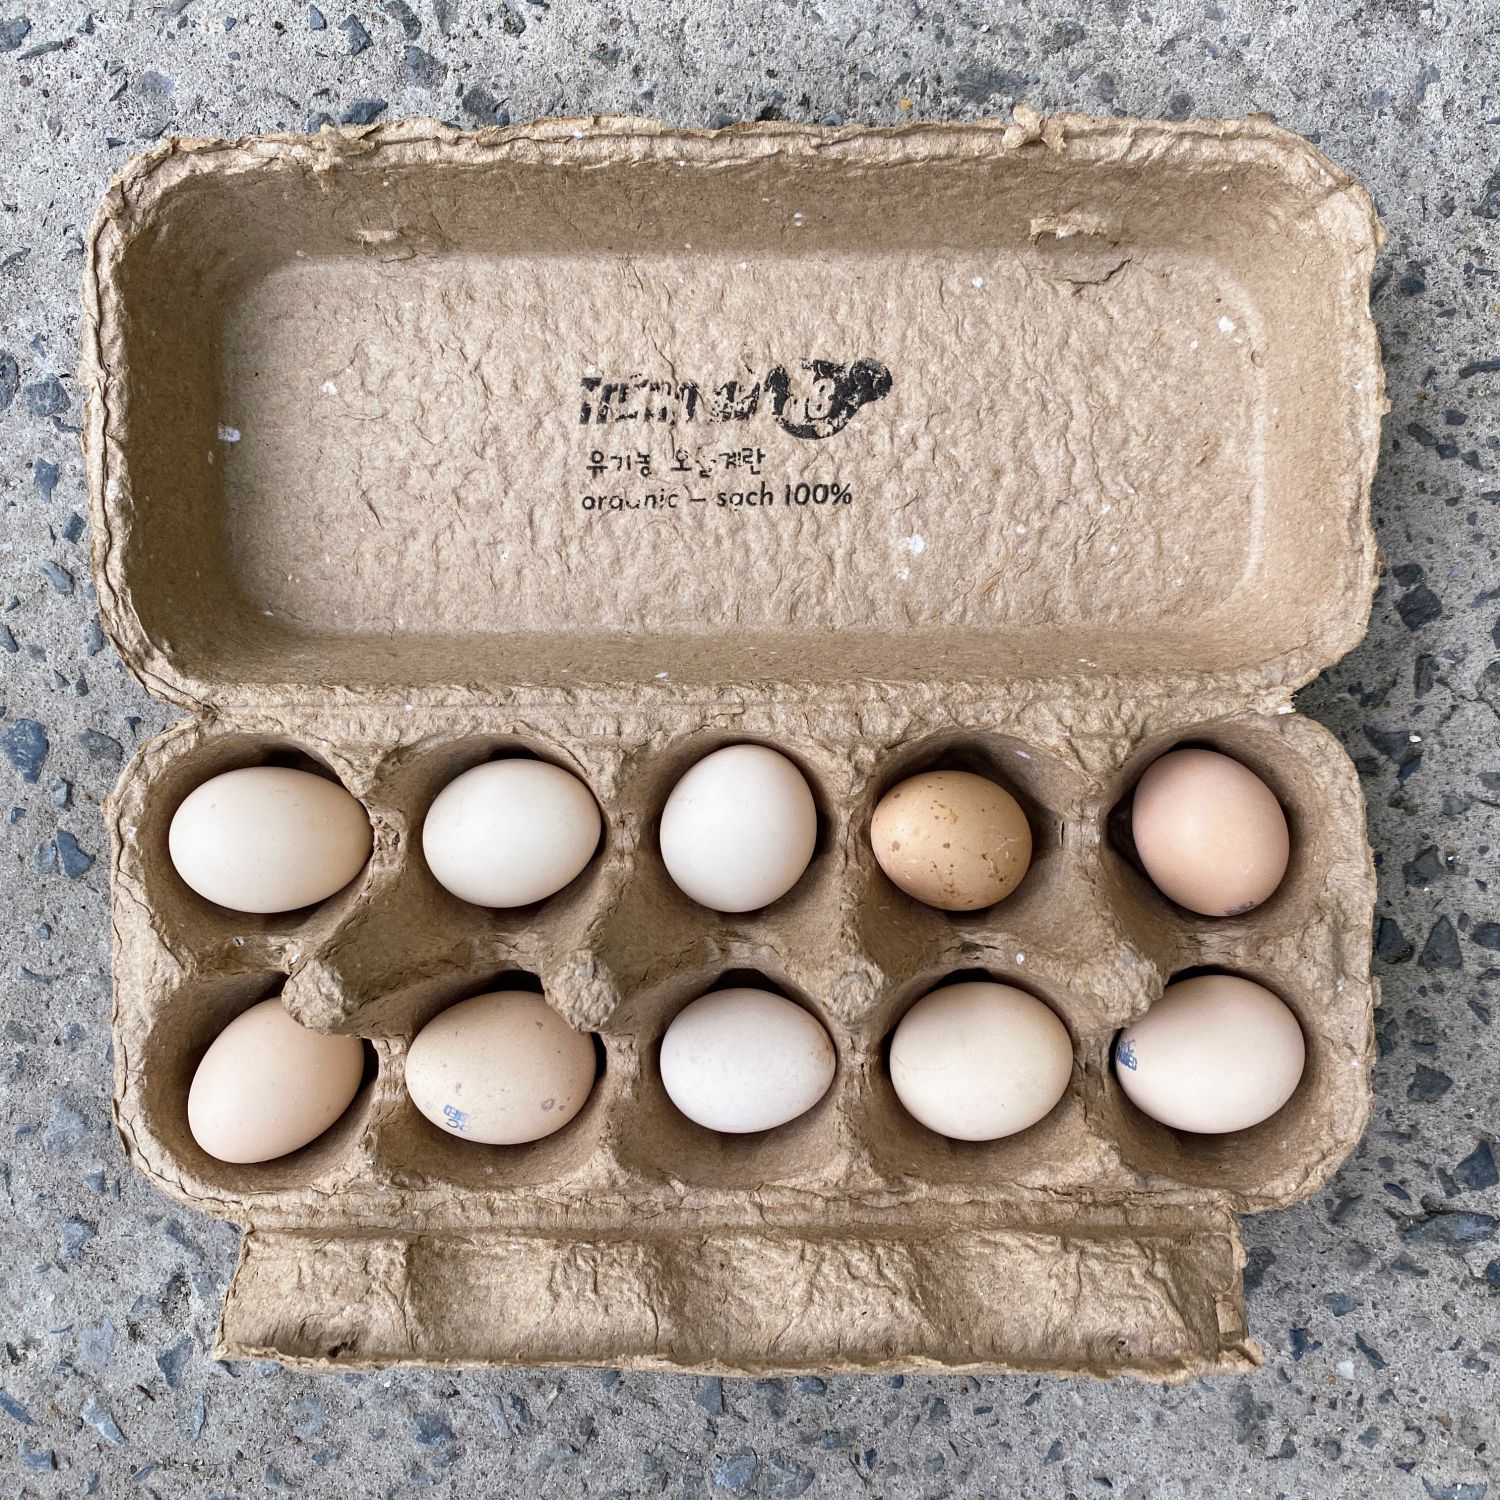 Surprise Your Team with Personalized Silkie Egg Packaging